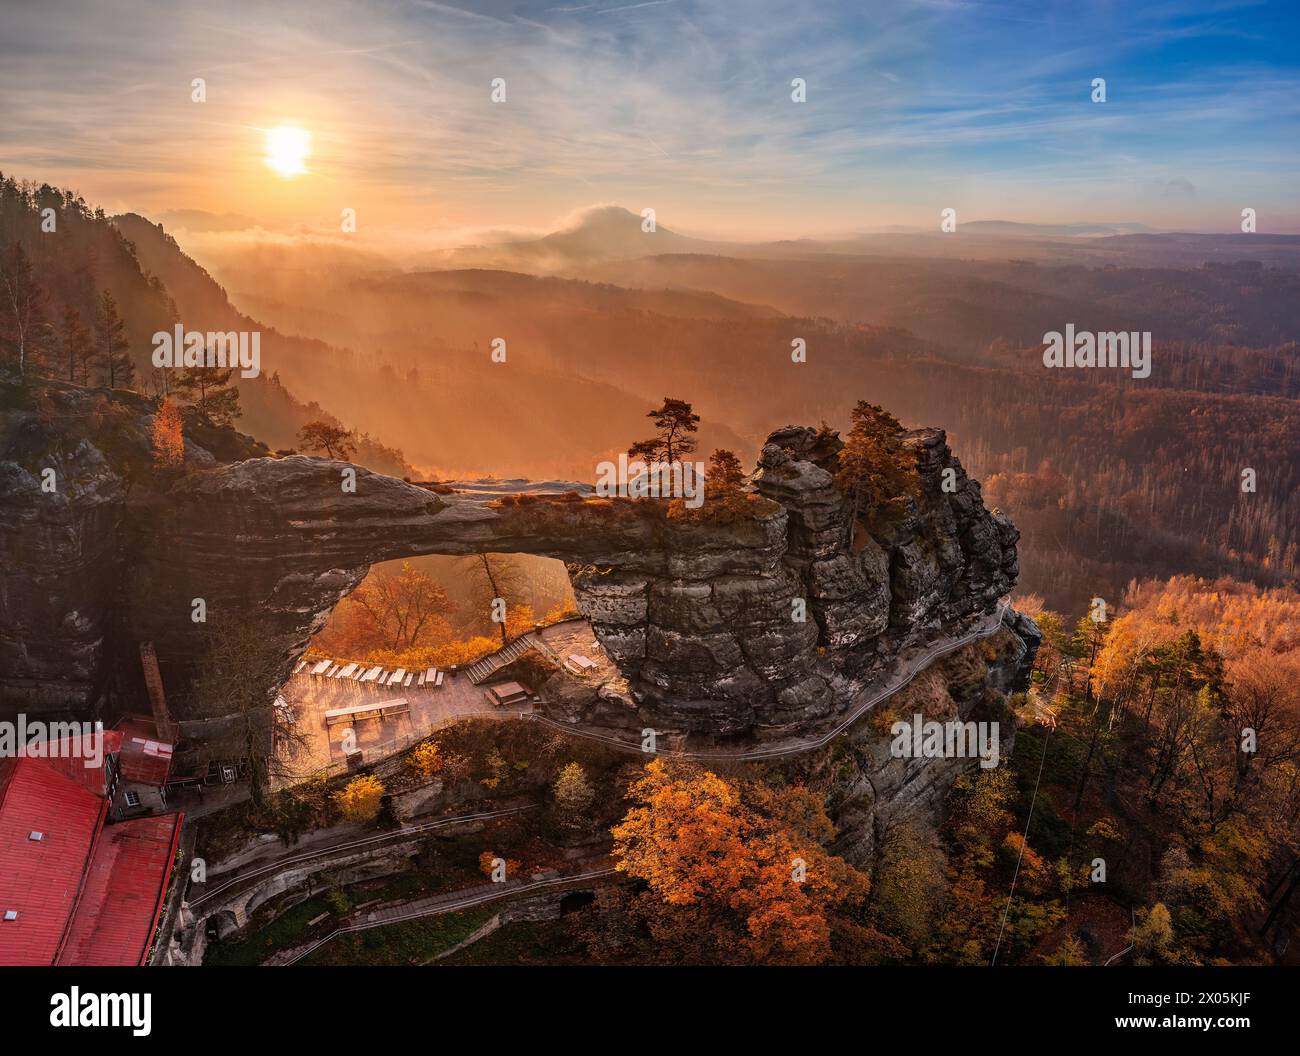 Hrensko, Czech Republic - Aerial panoramic view of the beautiful Pravcicka Brana (Pravcicka Gate) in Bohemian Switzerland National Park, the biggest n Stock Photo